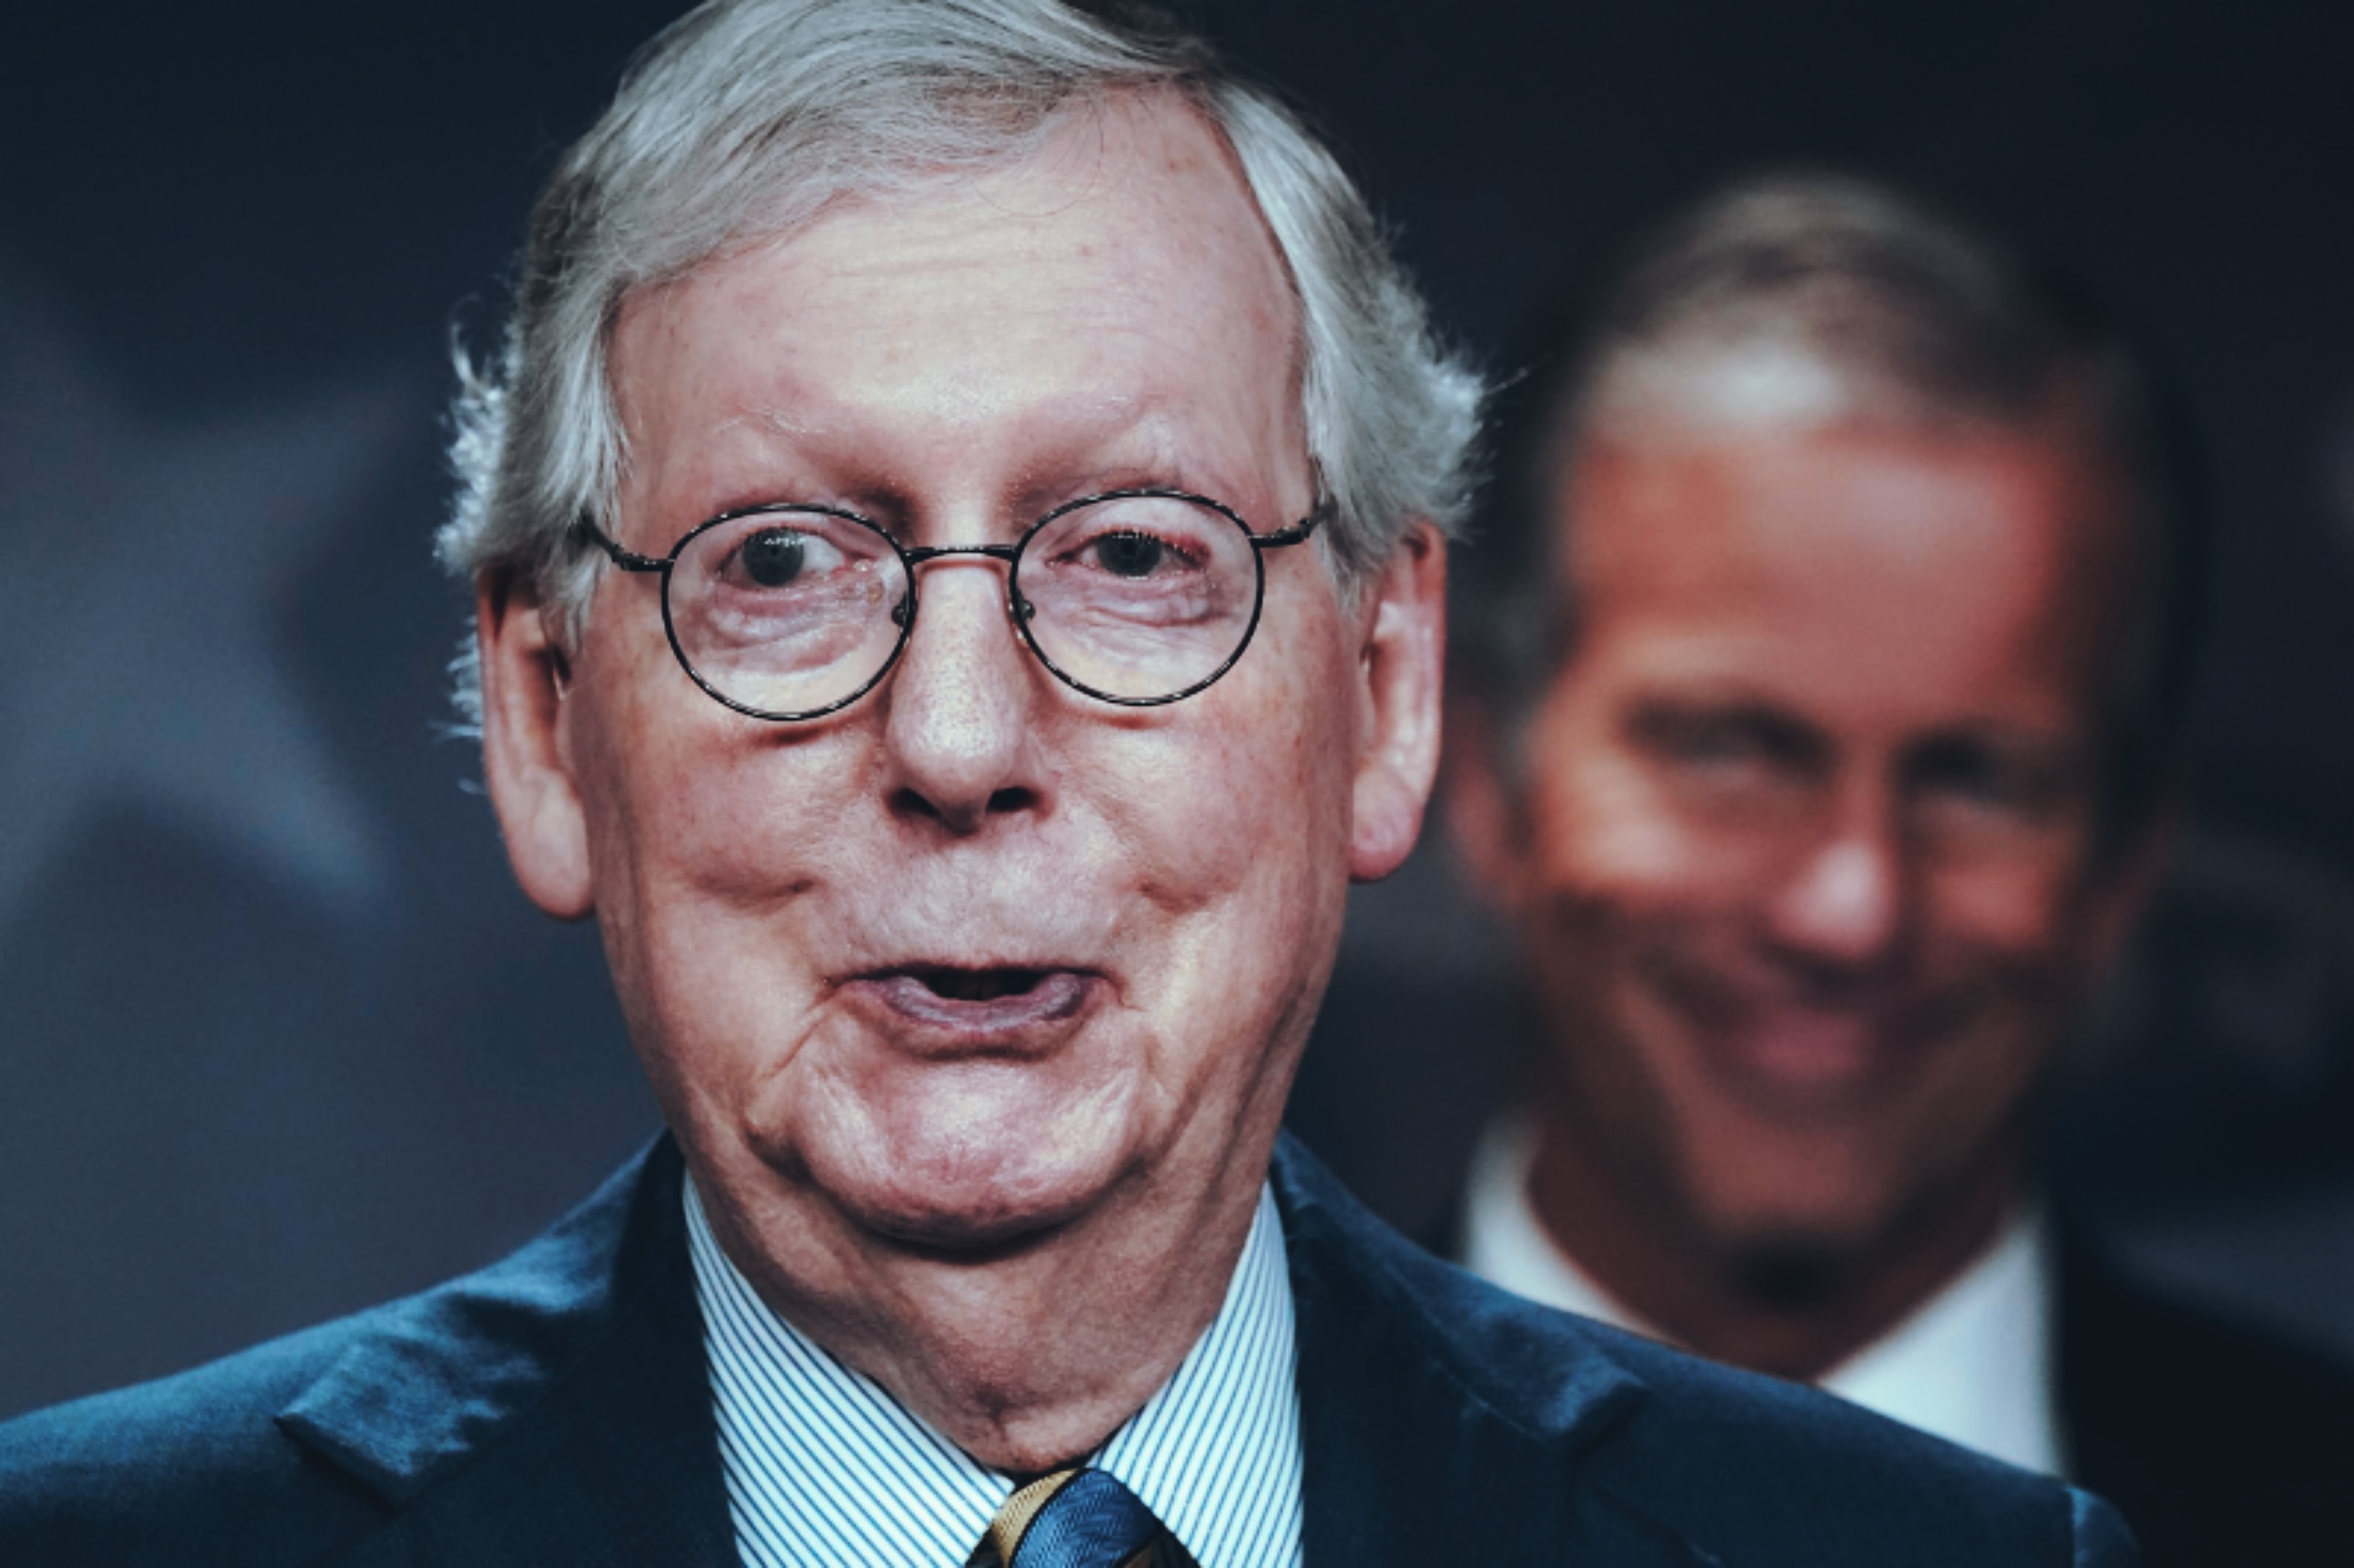 With Mitch McConnell gone as leader, weed has a better shot. Maybe.